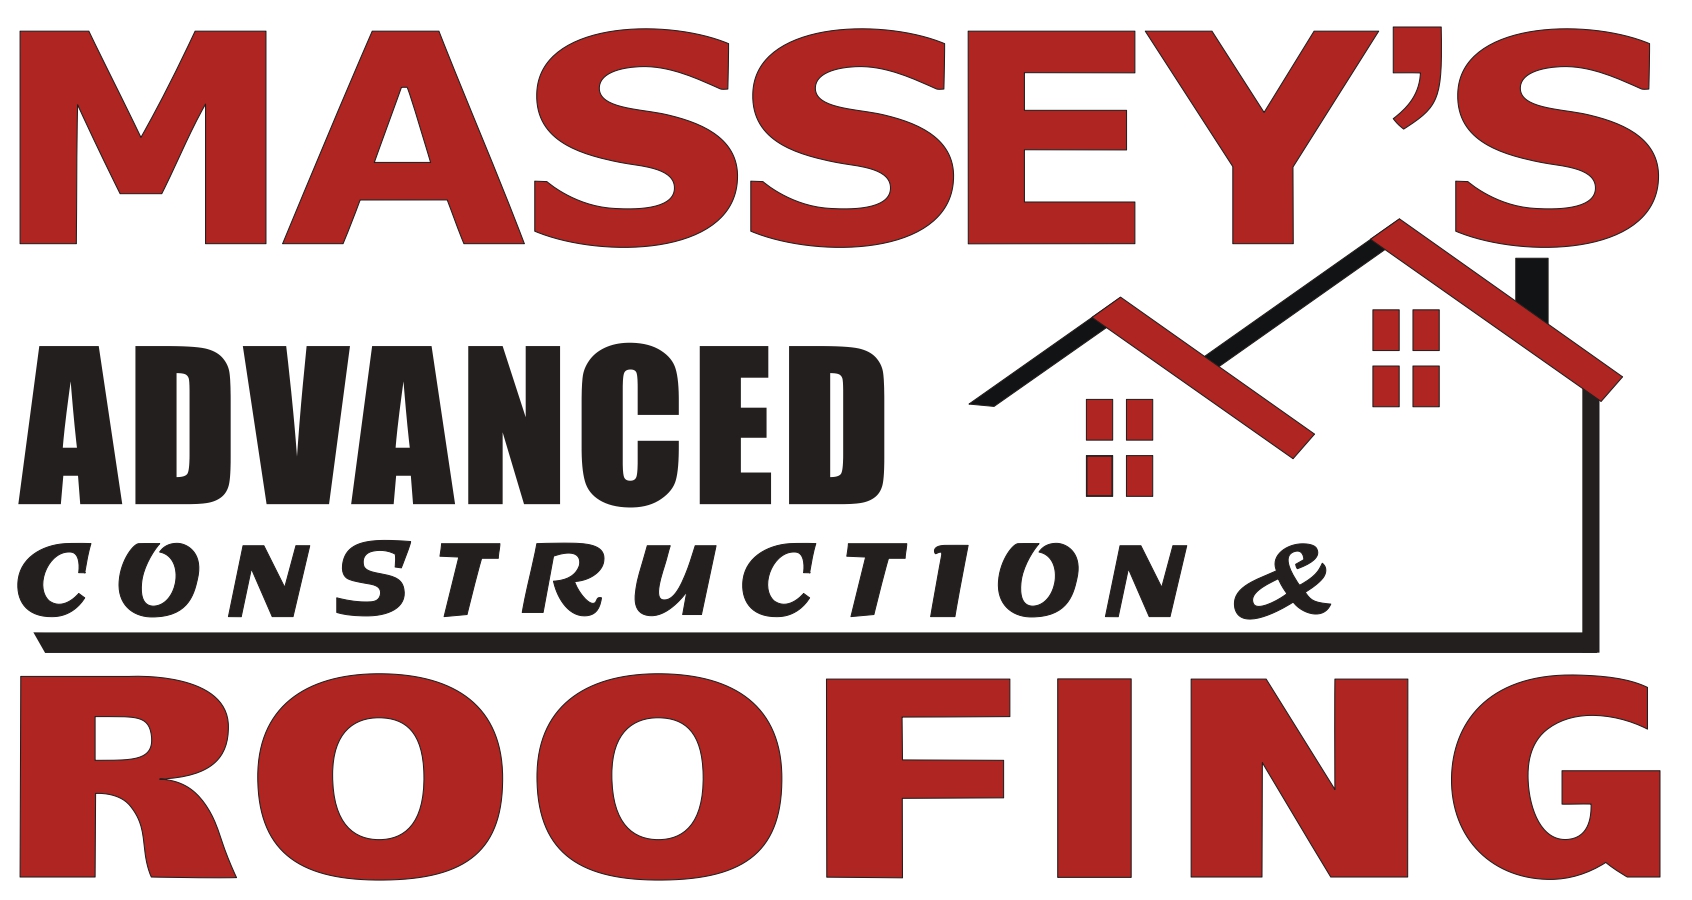 Massey's Advanced Construction & Roofing Revolutionizes Roofing Services in Midlothian, TX